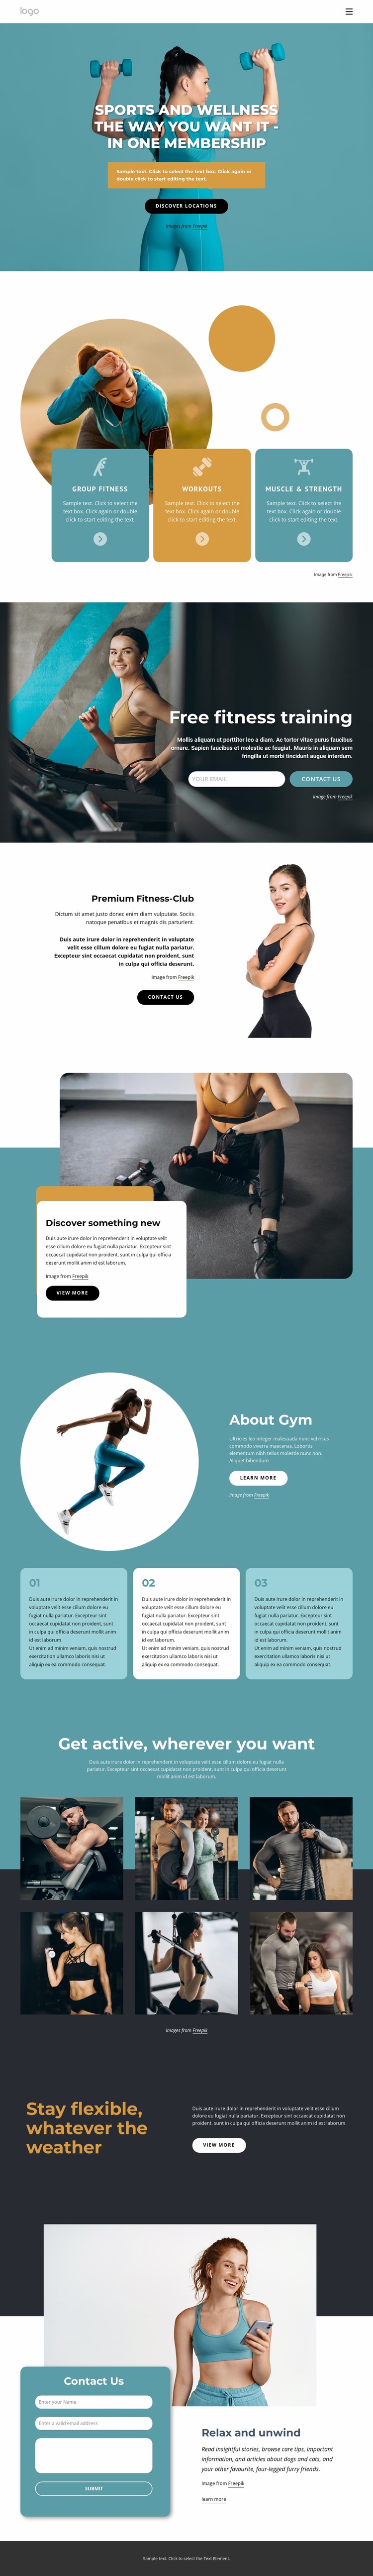 Workout anywhere with one membership Html Website Builder